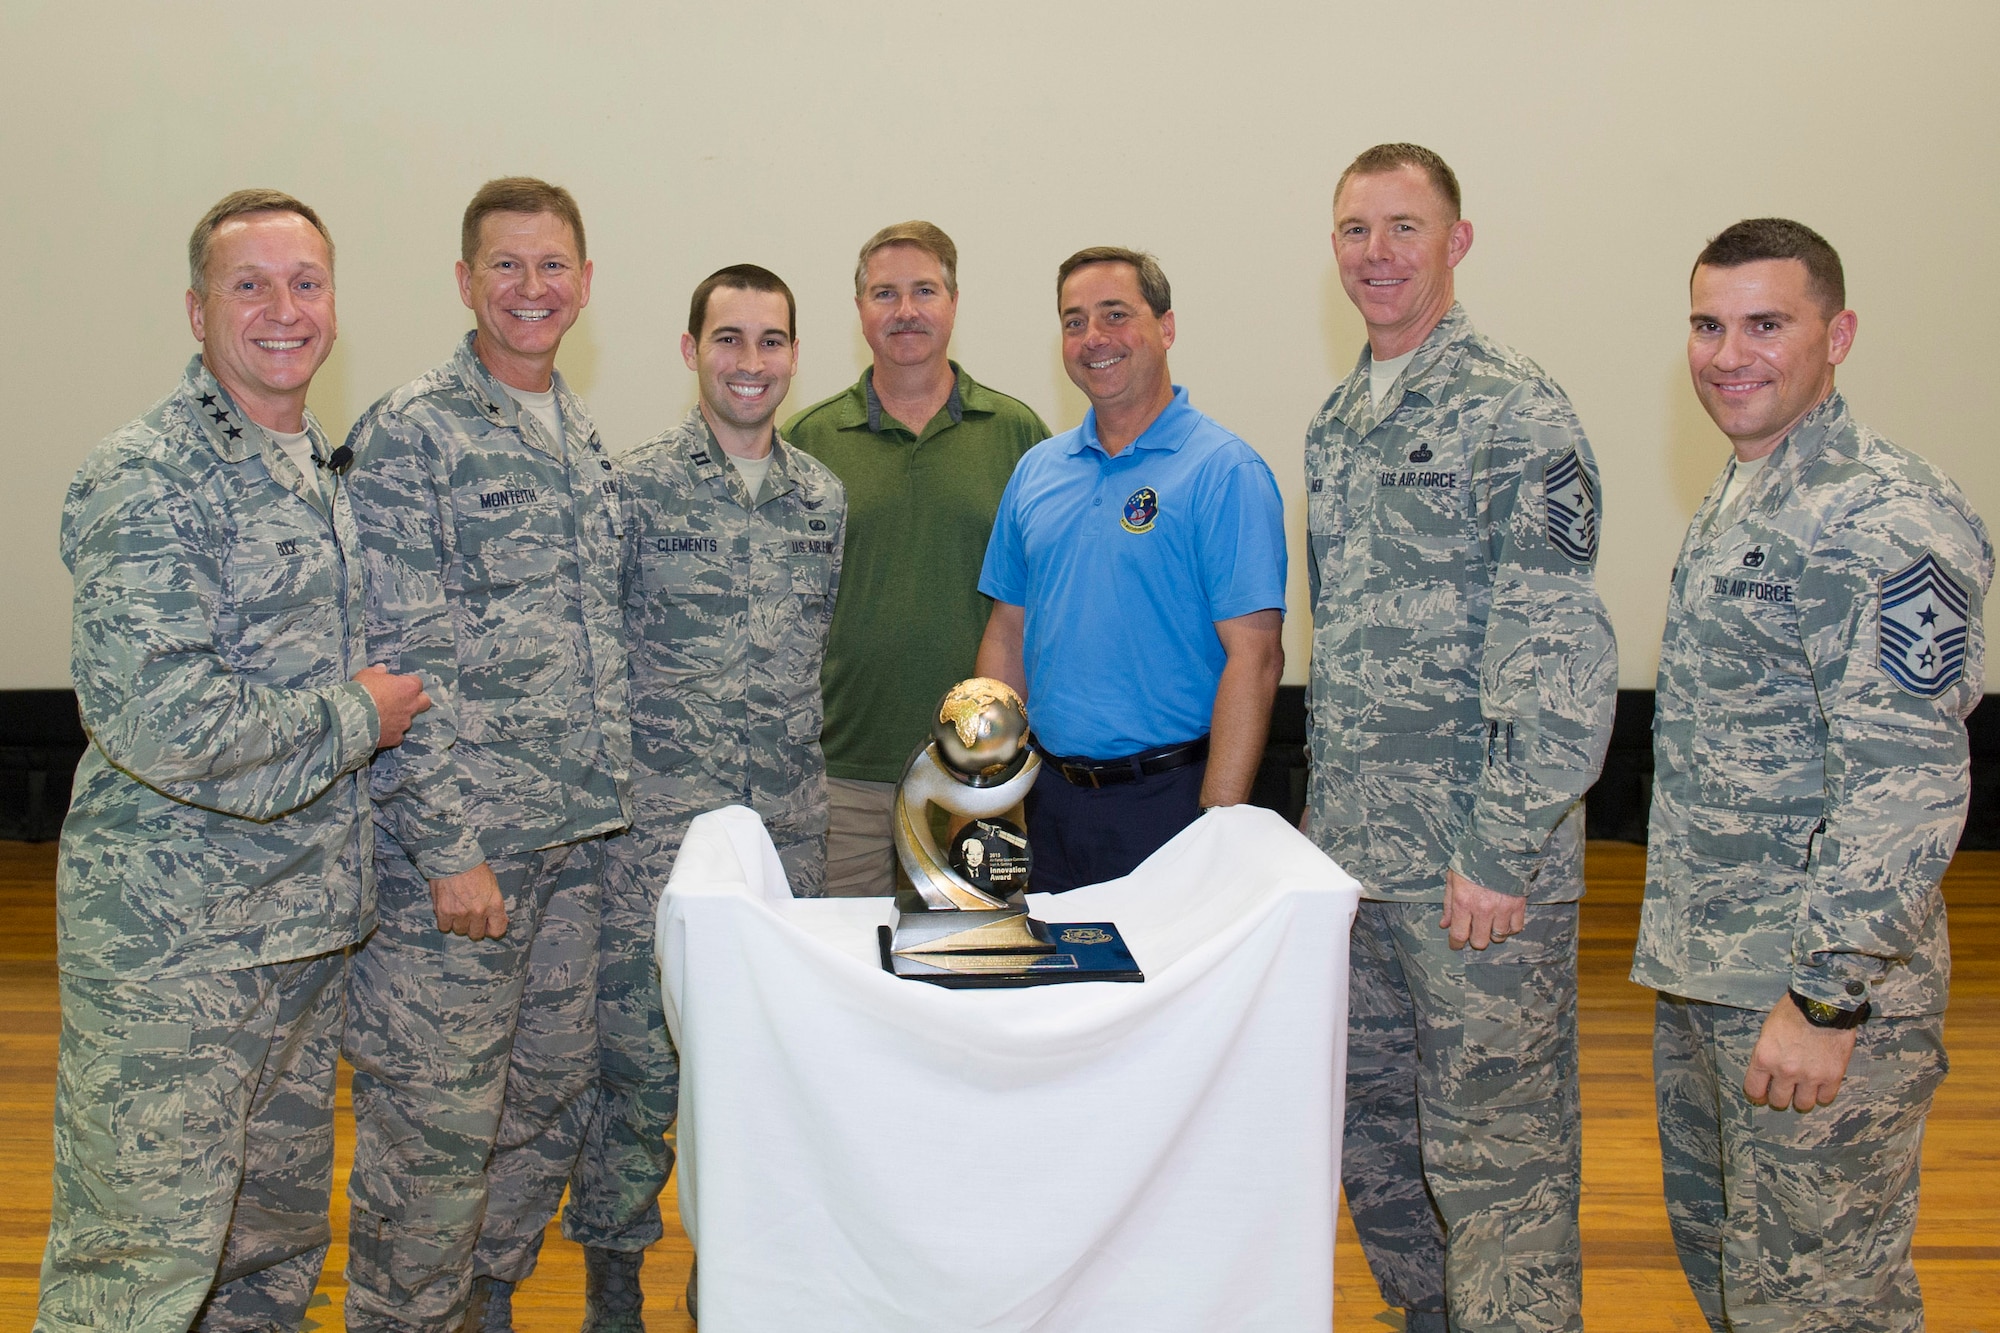 Capt. Kyle Clements, 5th Space Launch Squadron, left of center, Bradley Andrew, NASA Kennedy Space Center, center, and Mike McAleenan, 45th Weather Squadron, right of center, are presented the Air Force Space Command Ivan A. Getting Innovation Award for 2015 during an all call hosted by the 14th Air Force commander and command chief at Patrick Air Force Base, Florida, May 4, 2016. The award recognizes the year’s most innovative contribution to the Air Force Space Command mission and is named after Dr. Ivan A. Getting, a space pioneer recognized in the Space and Missile Hall of Fame for his creative work in navigational technology and vital work in the development of GPS. (U.S. Air Force photo by Matthew Jurgens/Released)